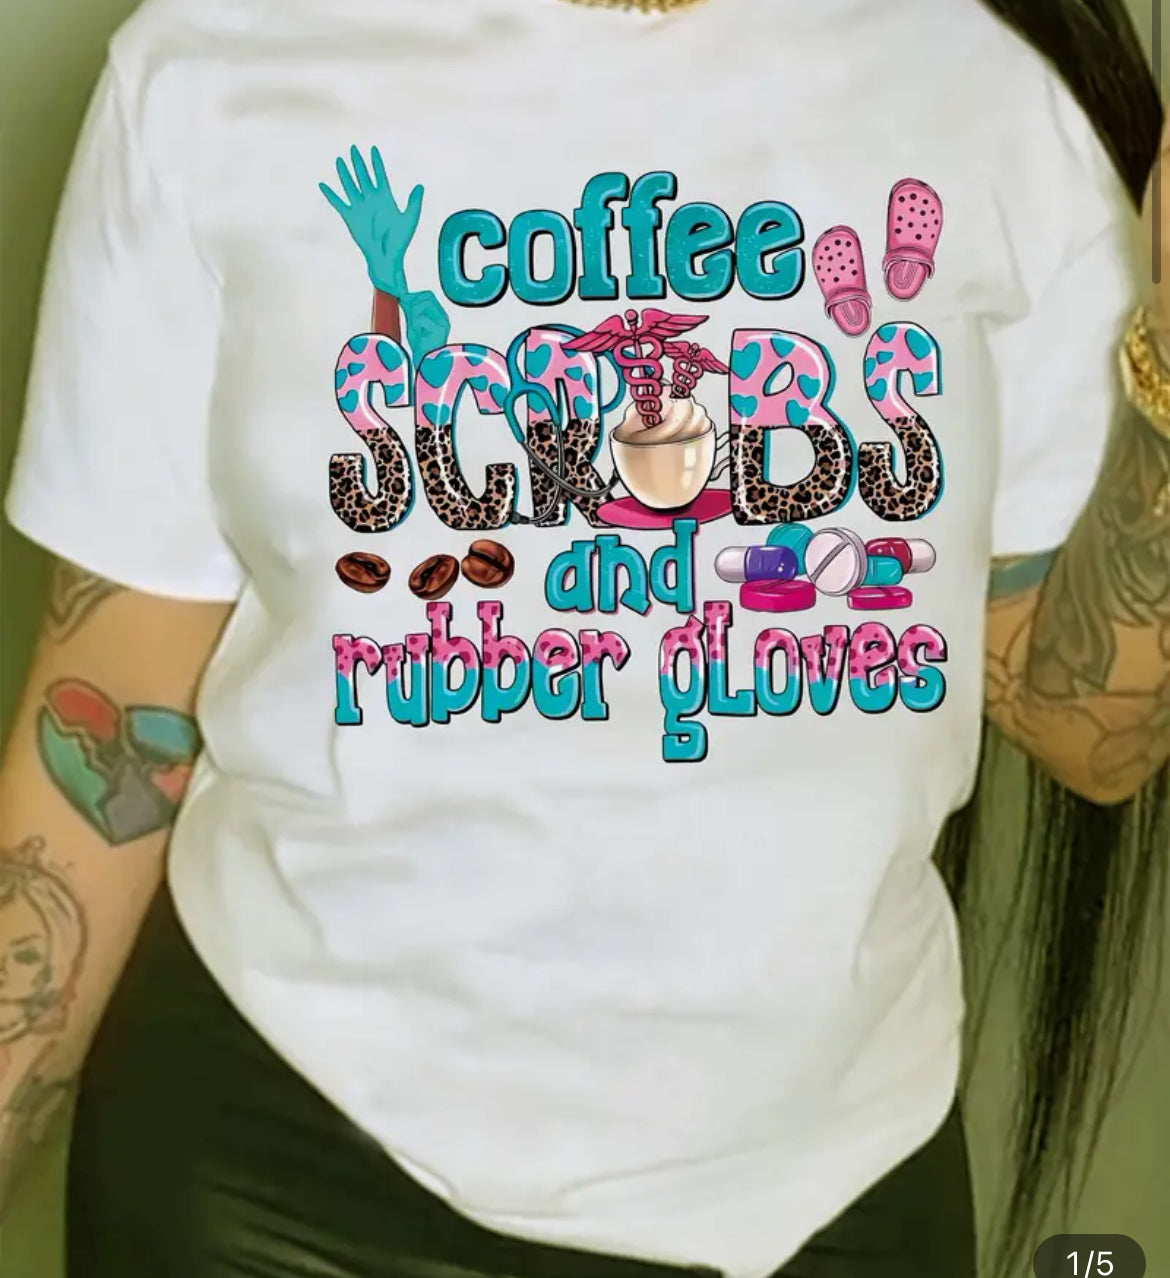 Coffee Scrubs and Rubber gloves Shirt